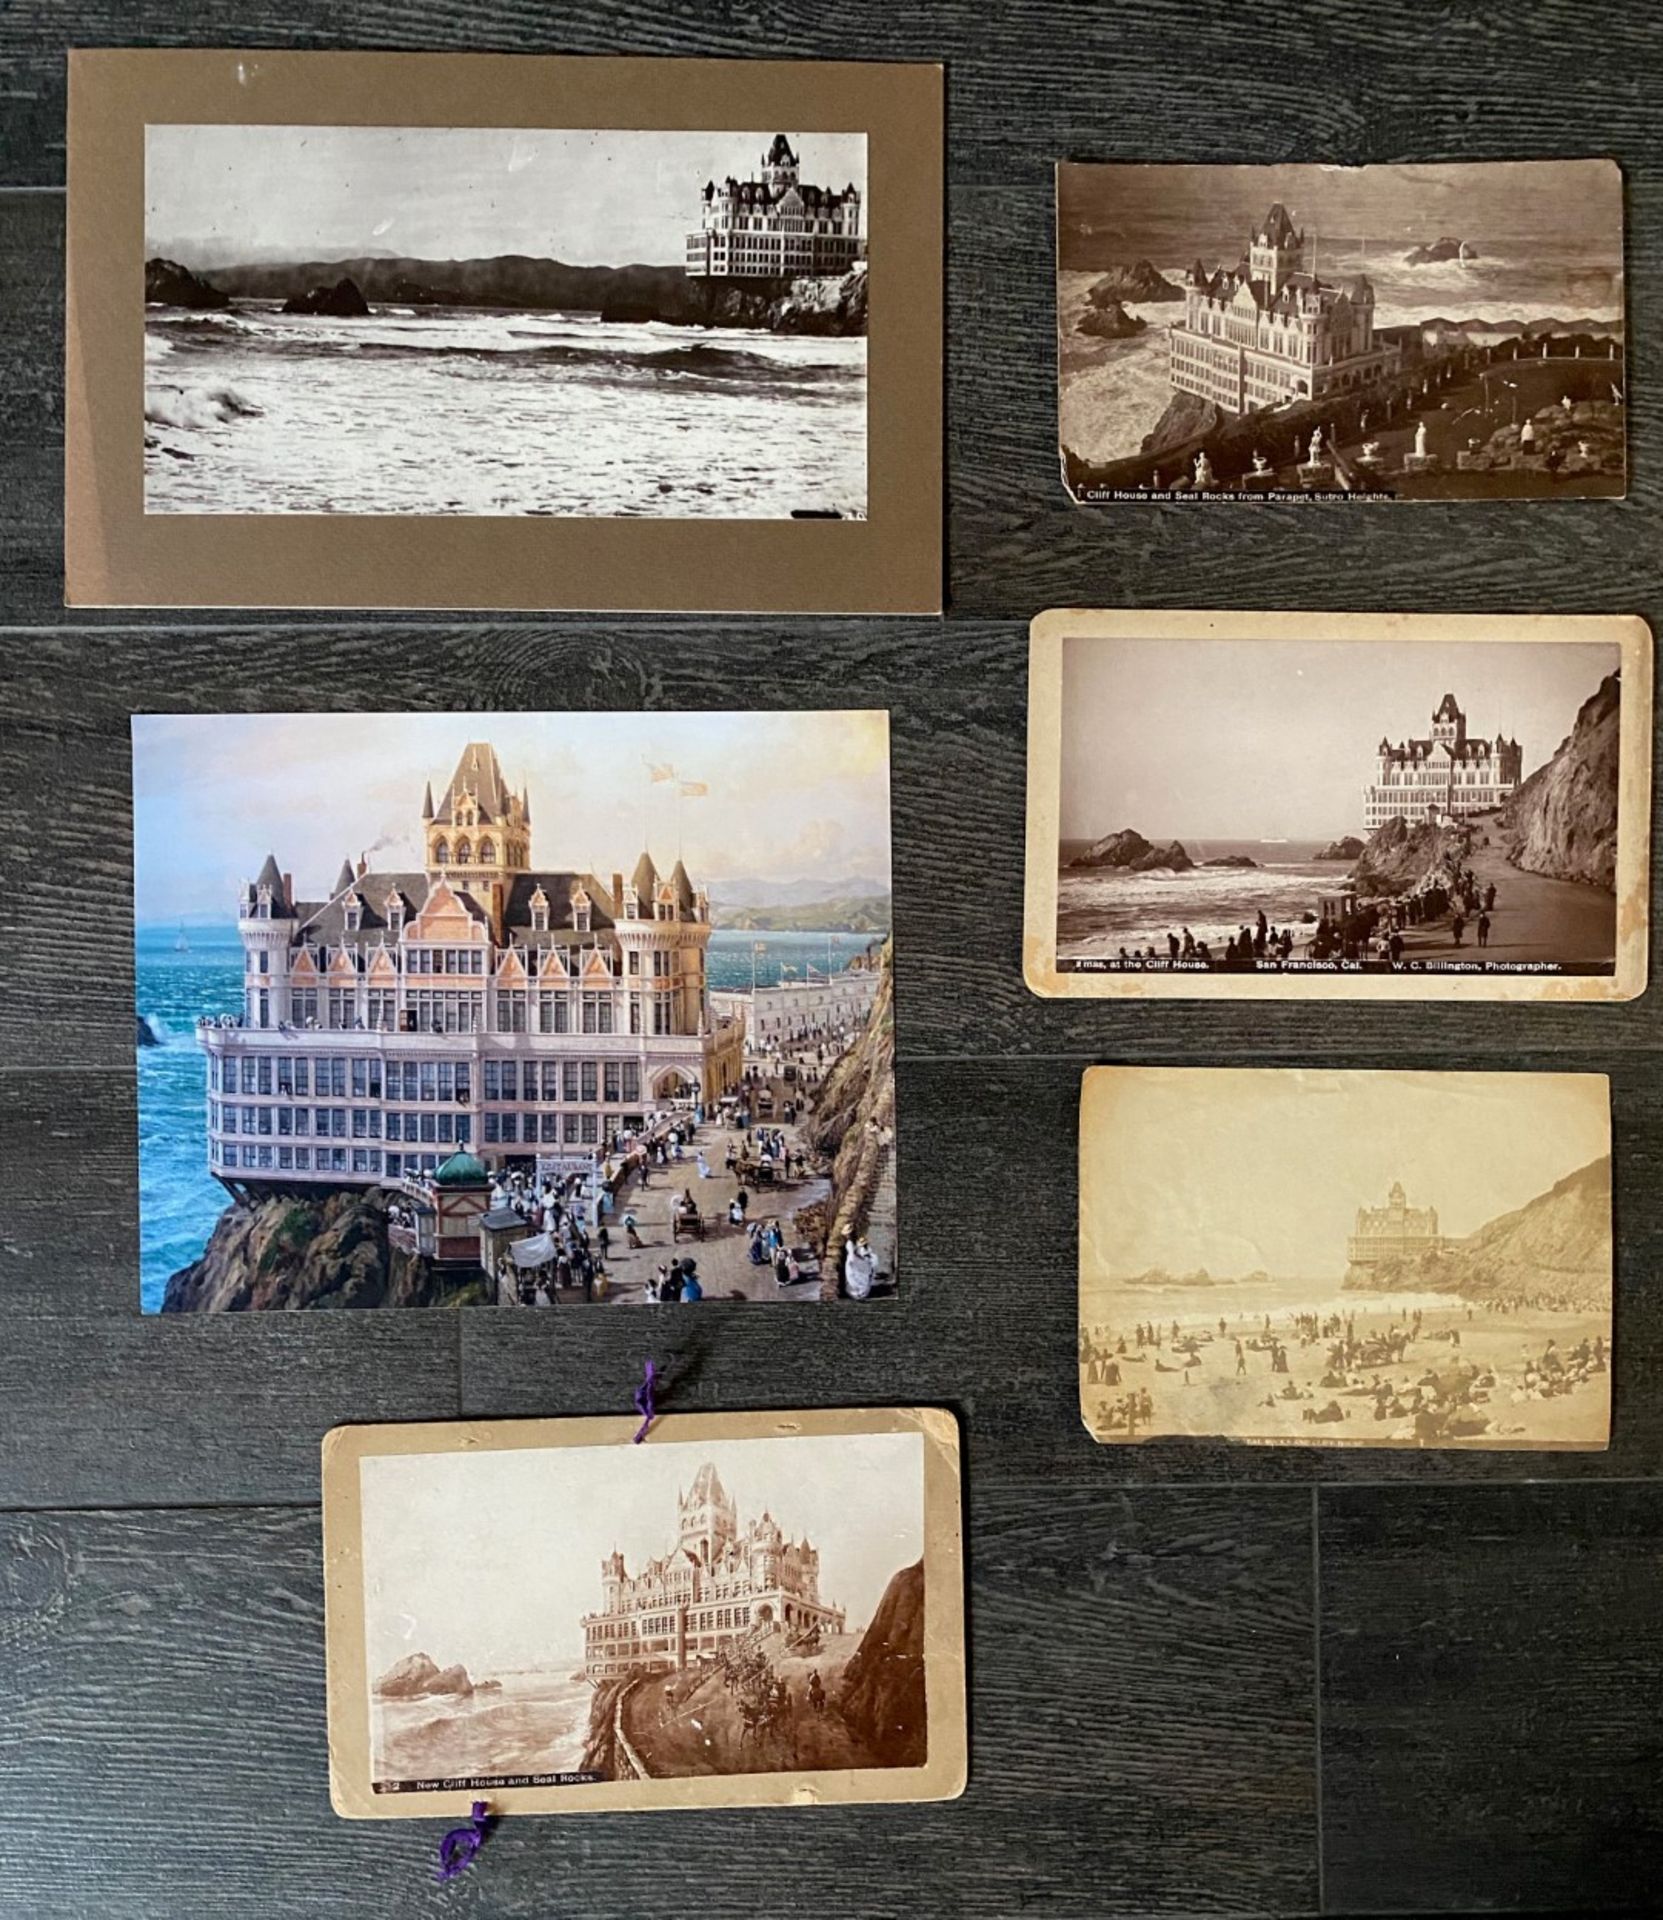 Assorted Vintage Photos, Prints, & Cabinet Cards of 3rd Cliff House